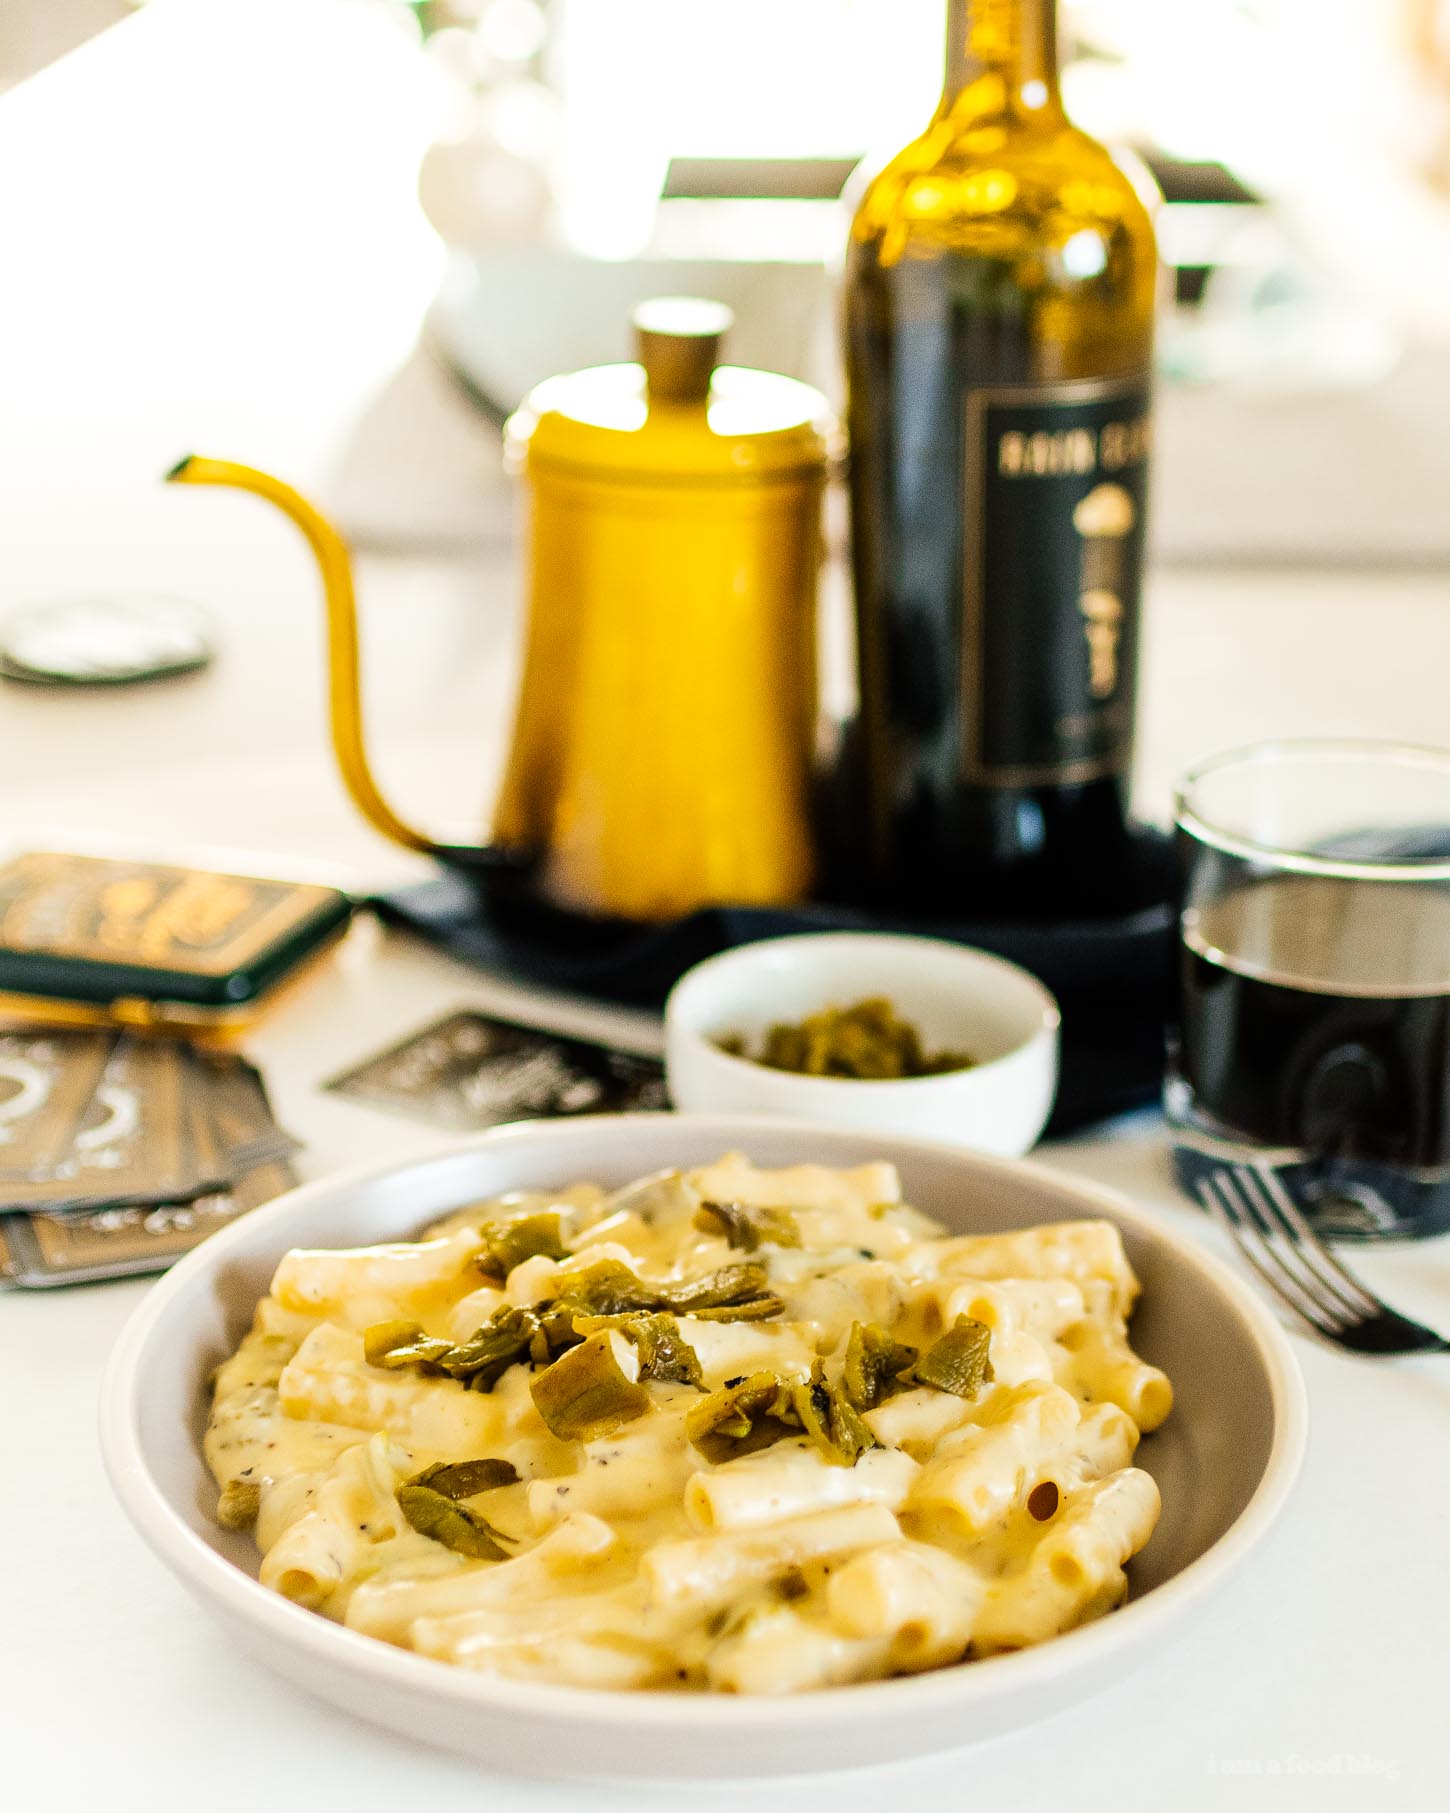 Creamy, spicy, comforting hatch green chile mac and cheese. Perfect for warming you up the coming fall days. #macandcheese #dinner #dinnerrecipes #cheese #comfort #comfortfood #hatchchile #greenchile